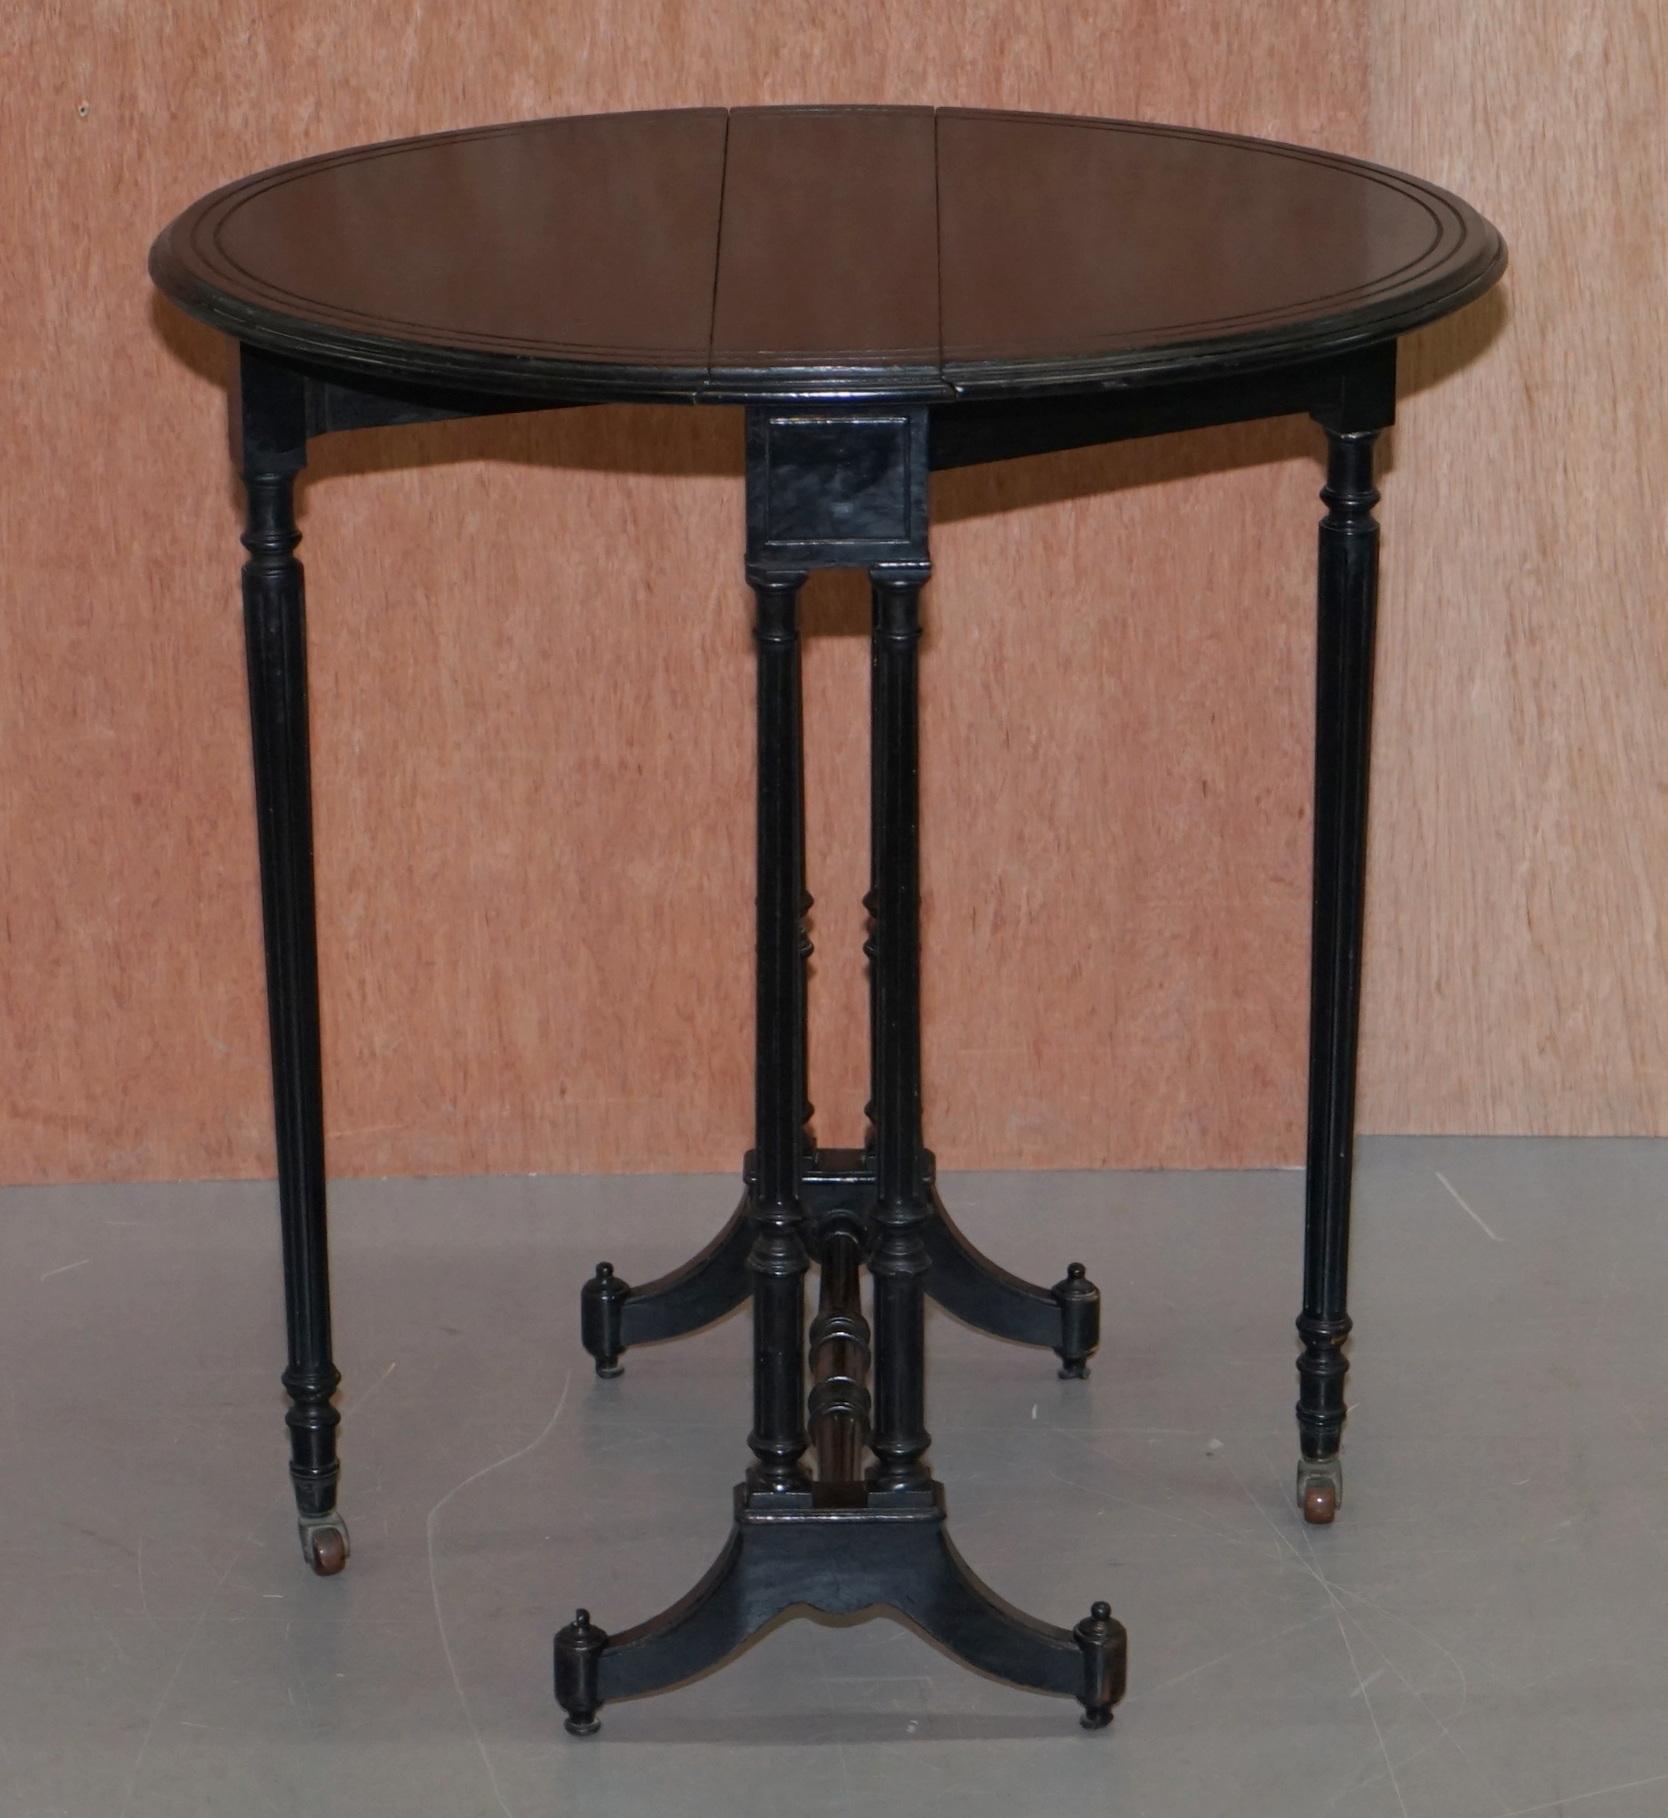 We are delighted to offer for sale this lovely original Antique Victorian circa 1880 ebonized Sunderland side table

A very good looking and well made table, it’s a period Victorian Sunderland table but quote rare as it’s a side table size. The